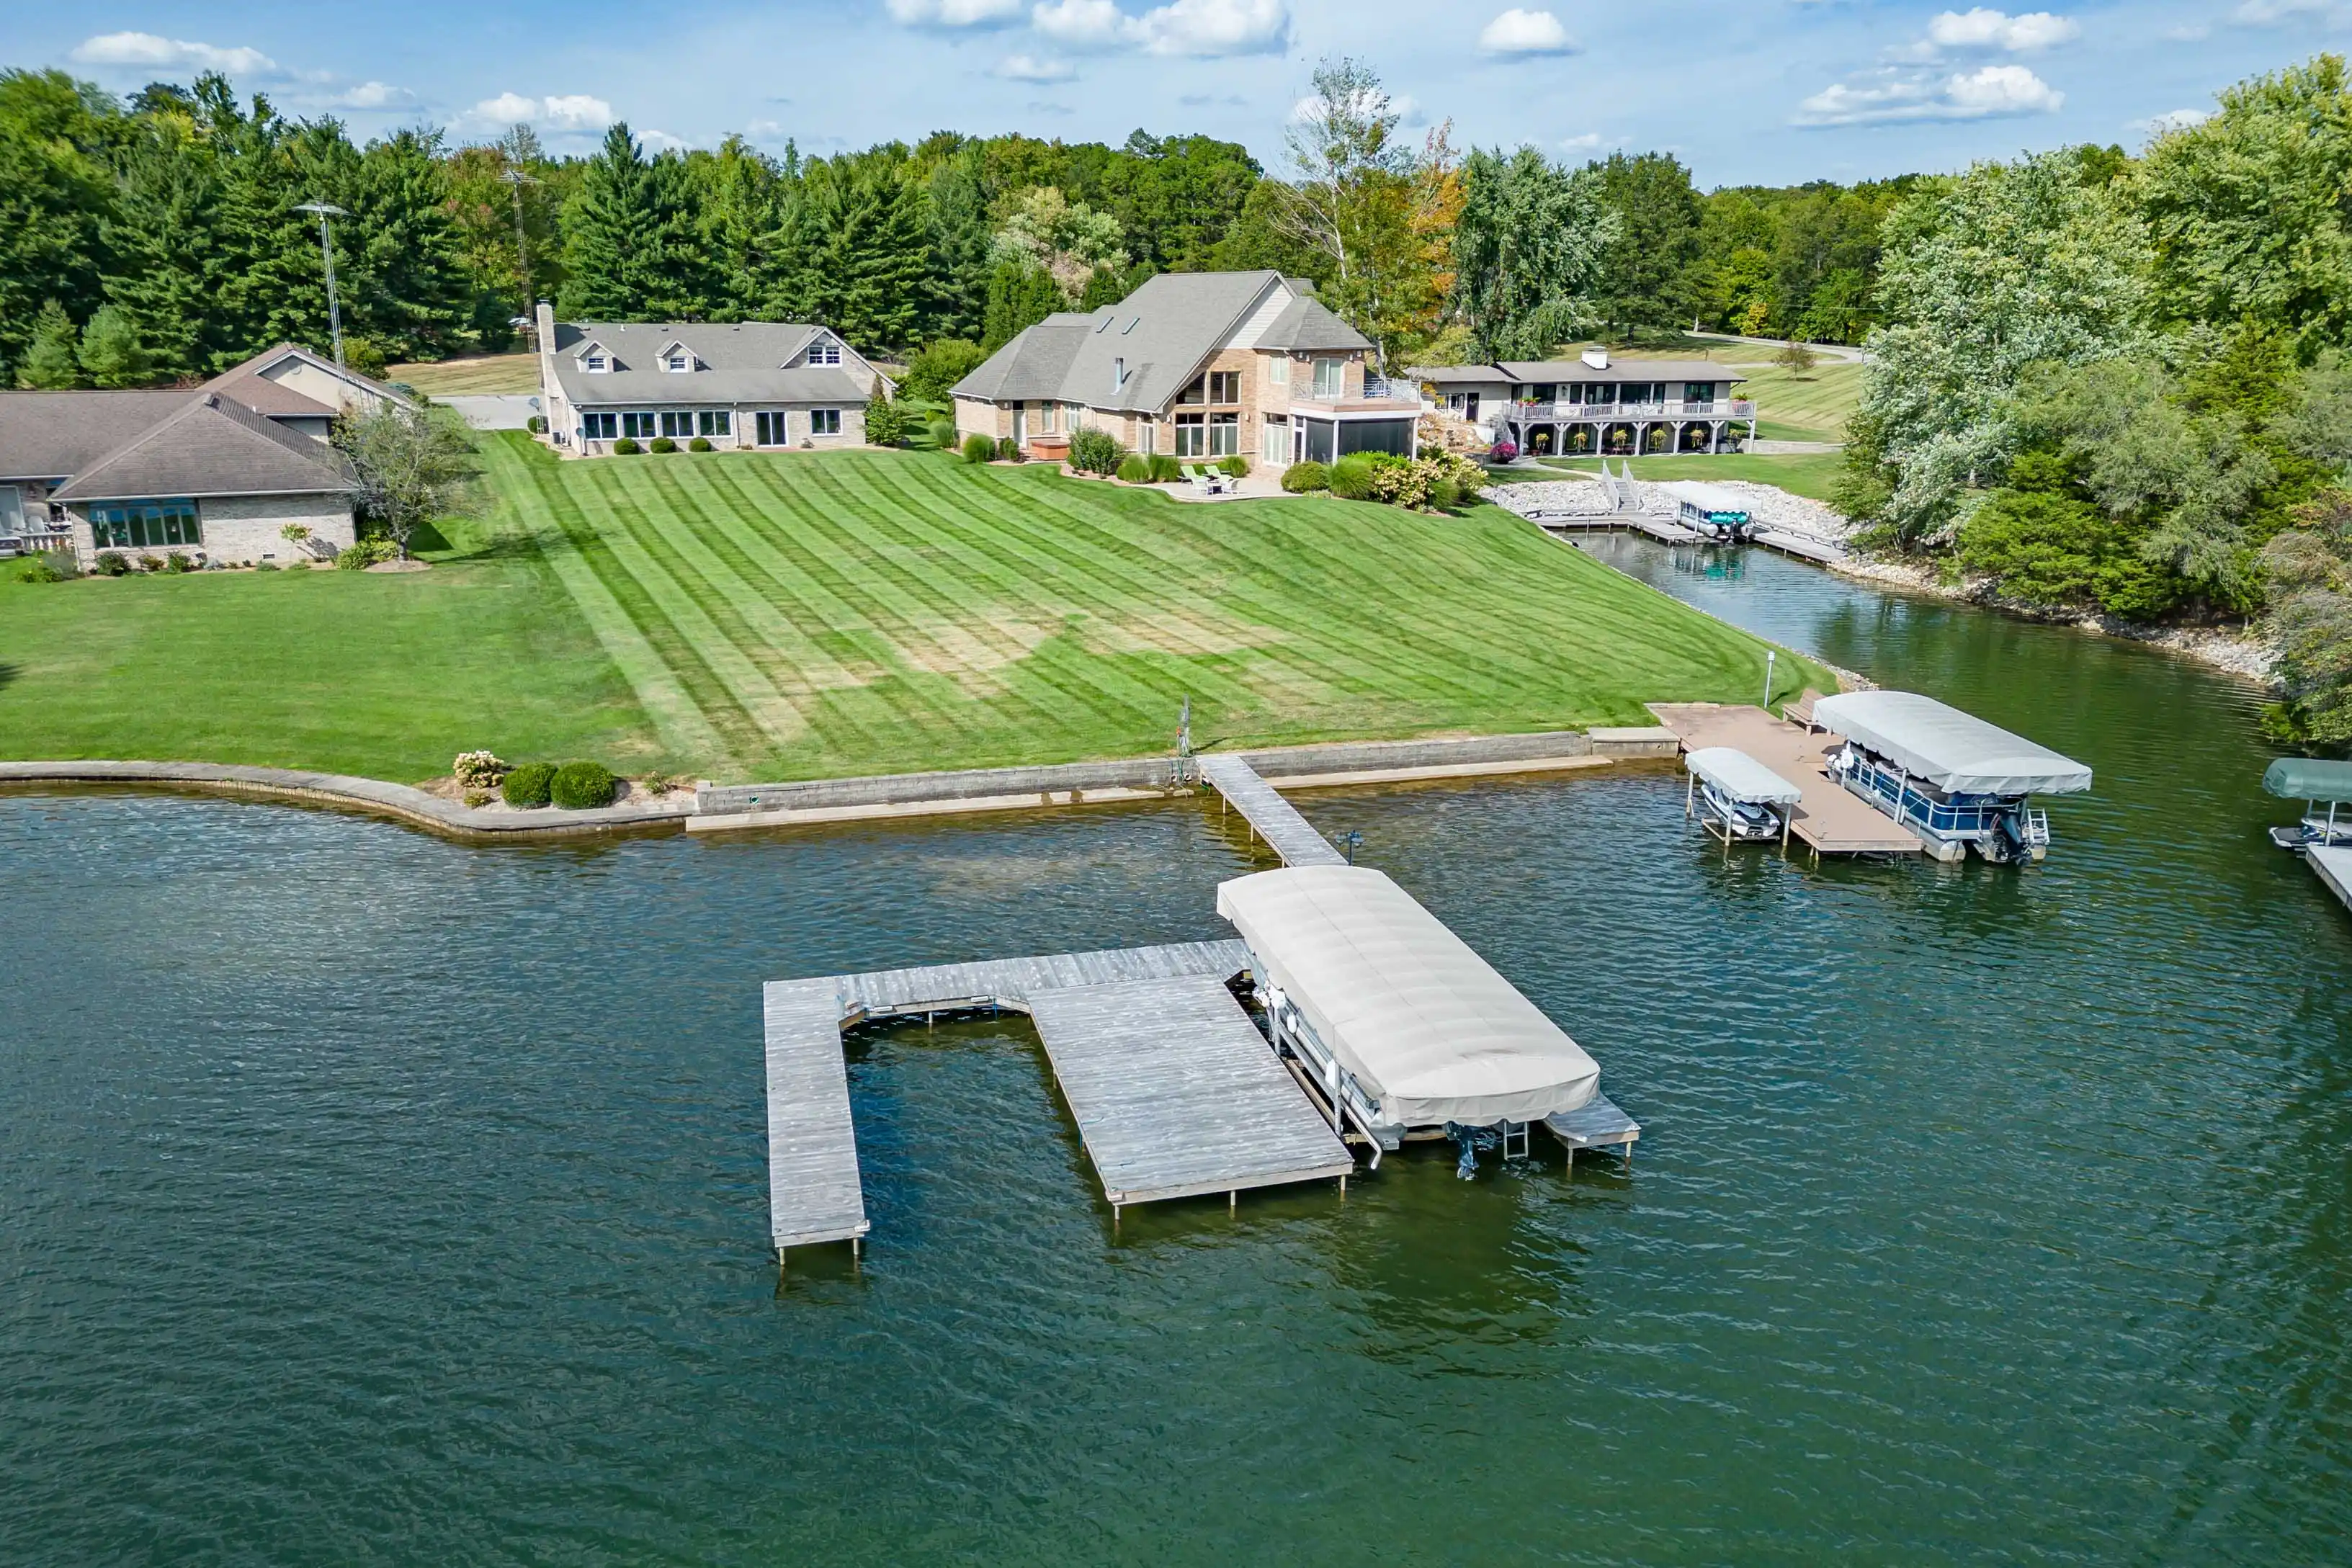 Aerial view of a large residential property with manicured lawn, multiple houses, and a private dock with covered boats on a calm body of water.